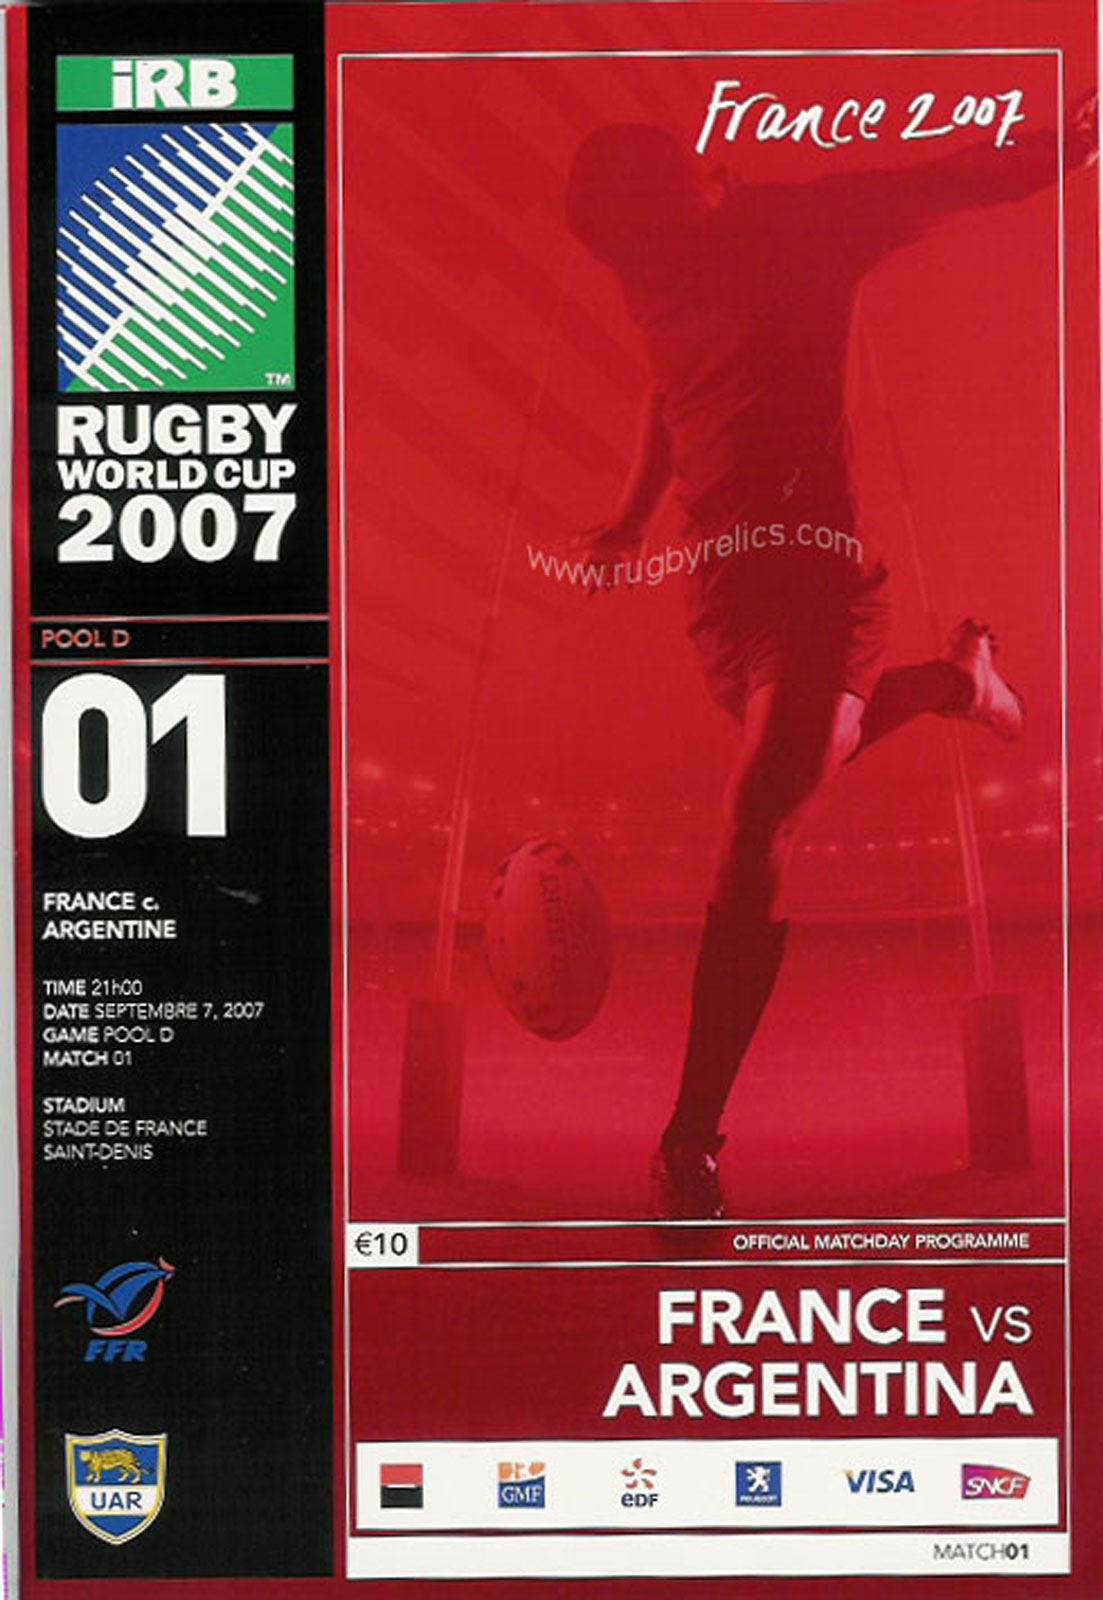 Rugby World Cup programmes 1987, 1991, 1995, 1999, 2003, 2007, 2011 & 2015